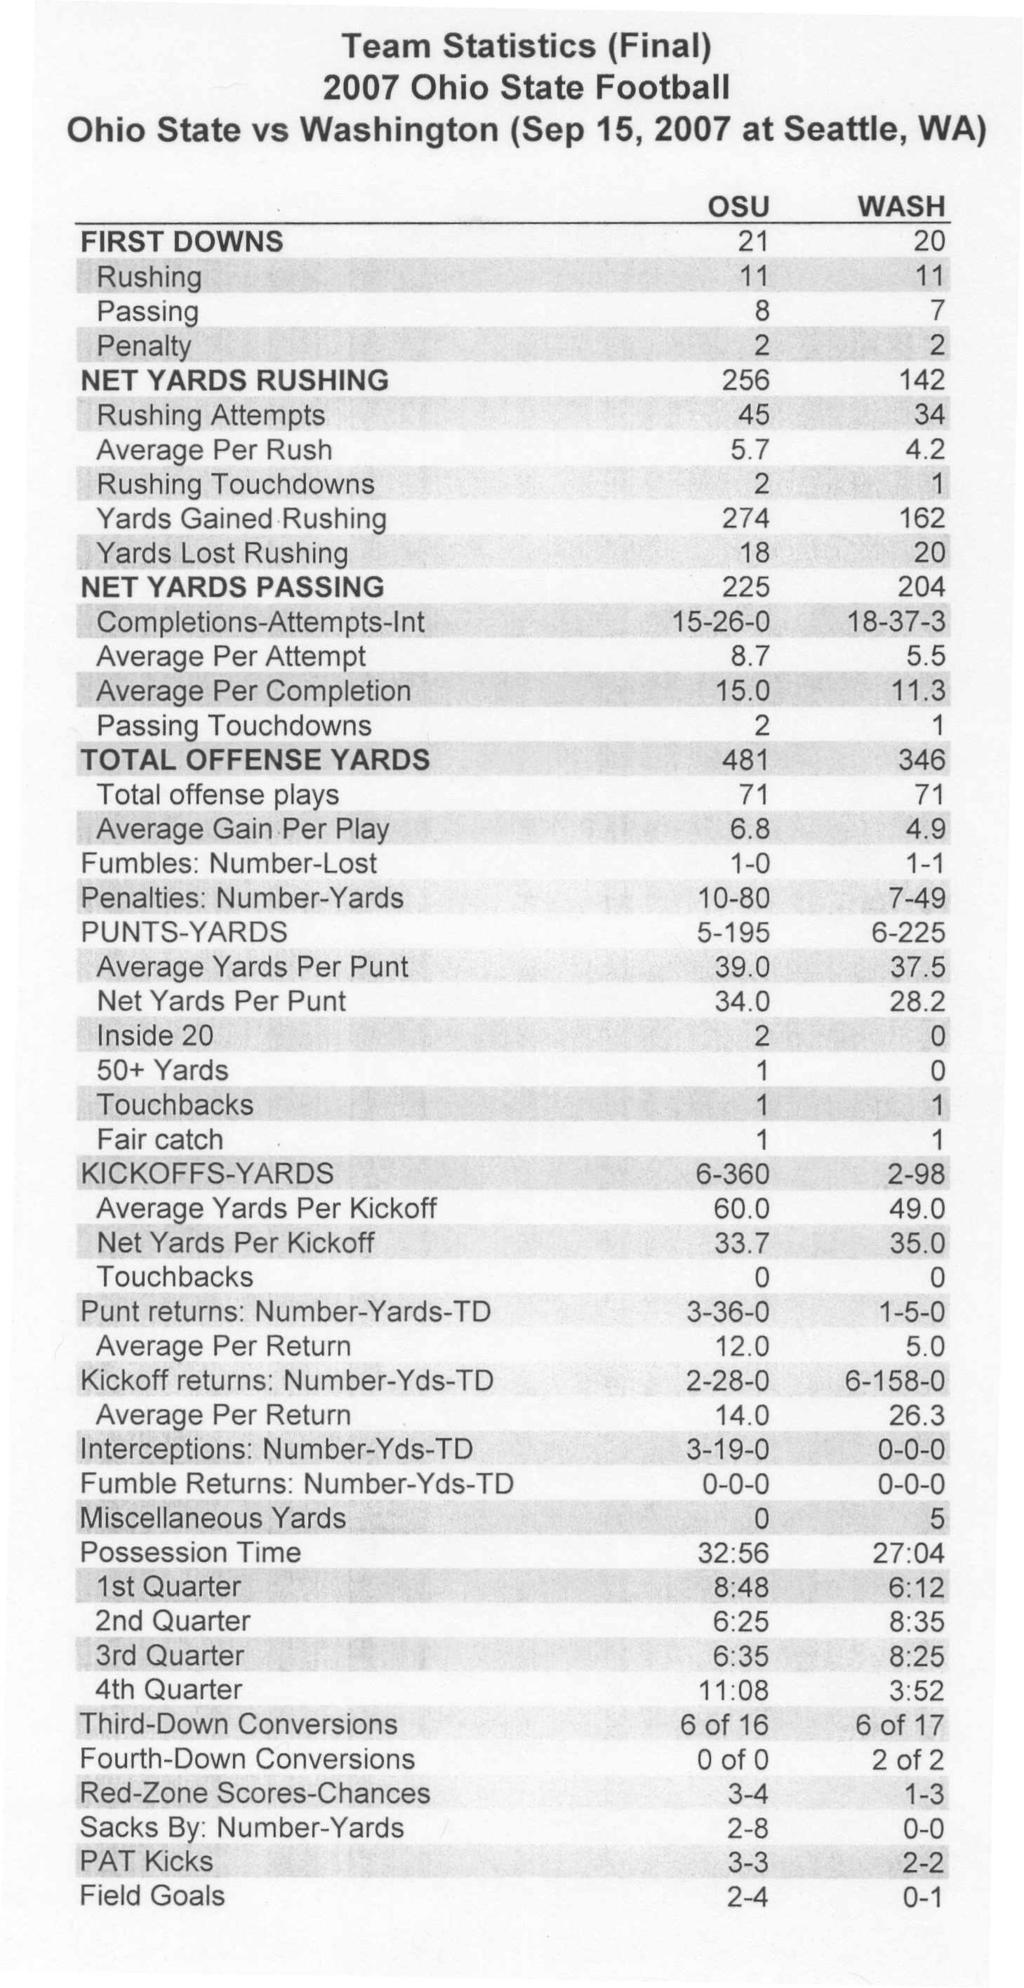 Team Statistics (Final) 007 Football FIRST DOWNS Penalty NET YARDS RUSHING Attempts Average Per Rush Touchdowns Yards Gained Yards Lost NET YARDS PASSING Completions-Attem pts-i nt Average Per